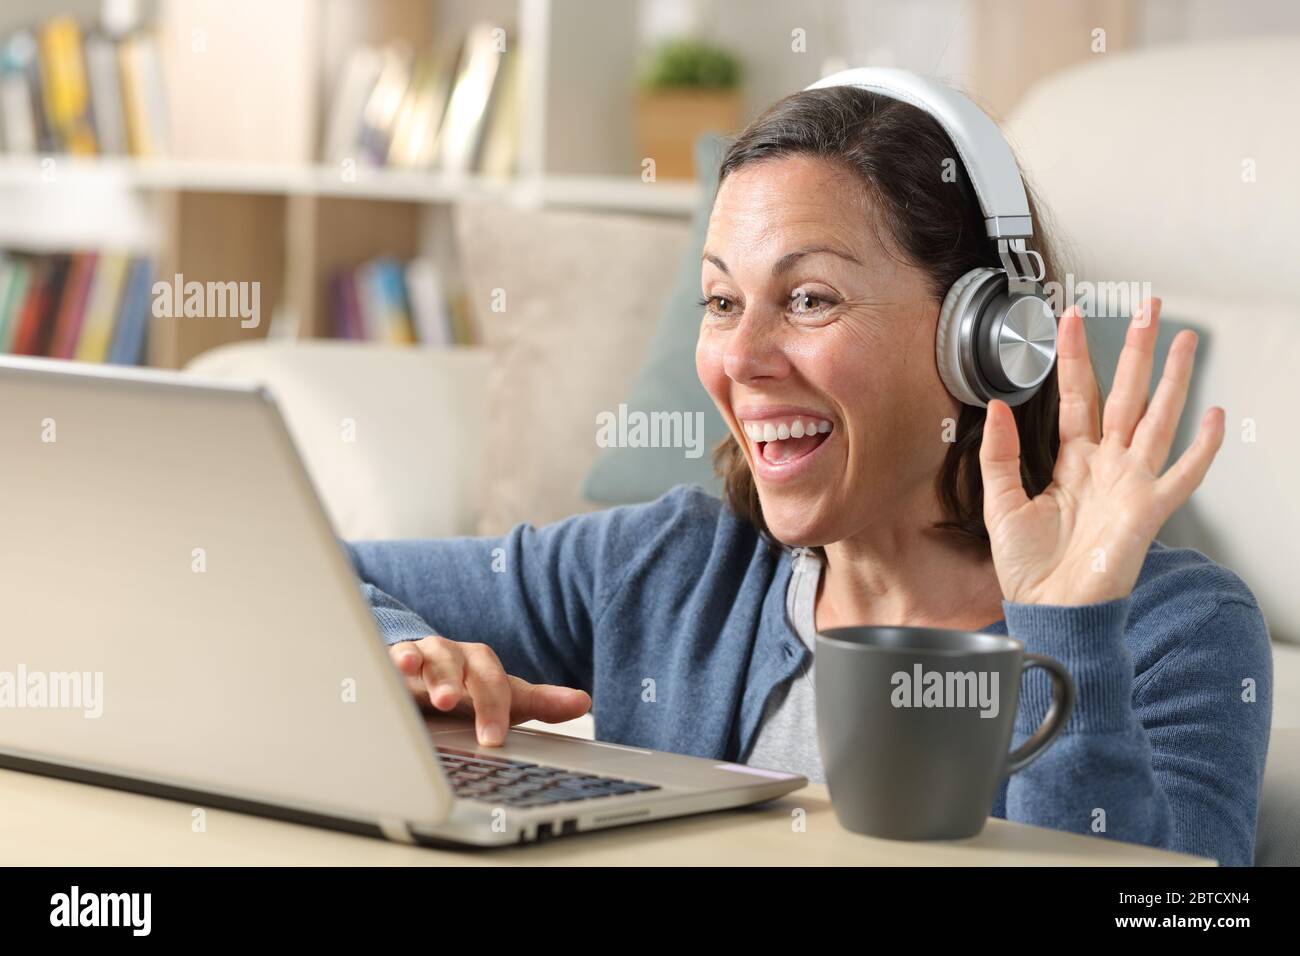 Happy adult woman videocalling with headphones on laptop webcam sitting on the floor at home Stock Photo